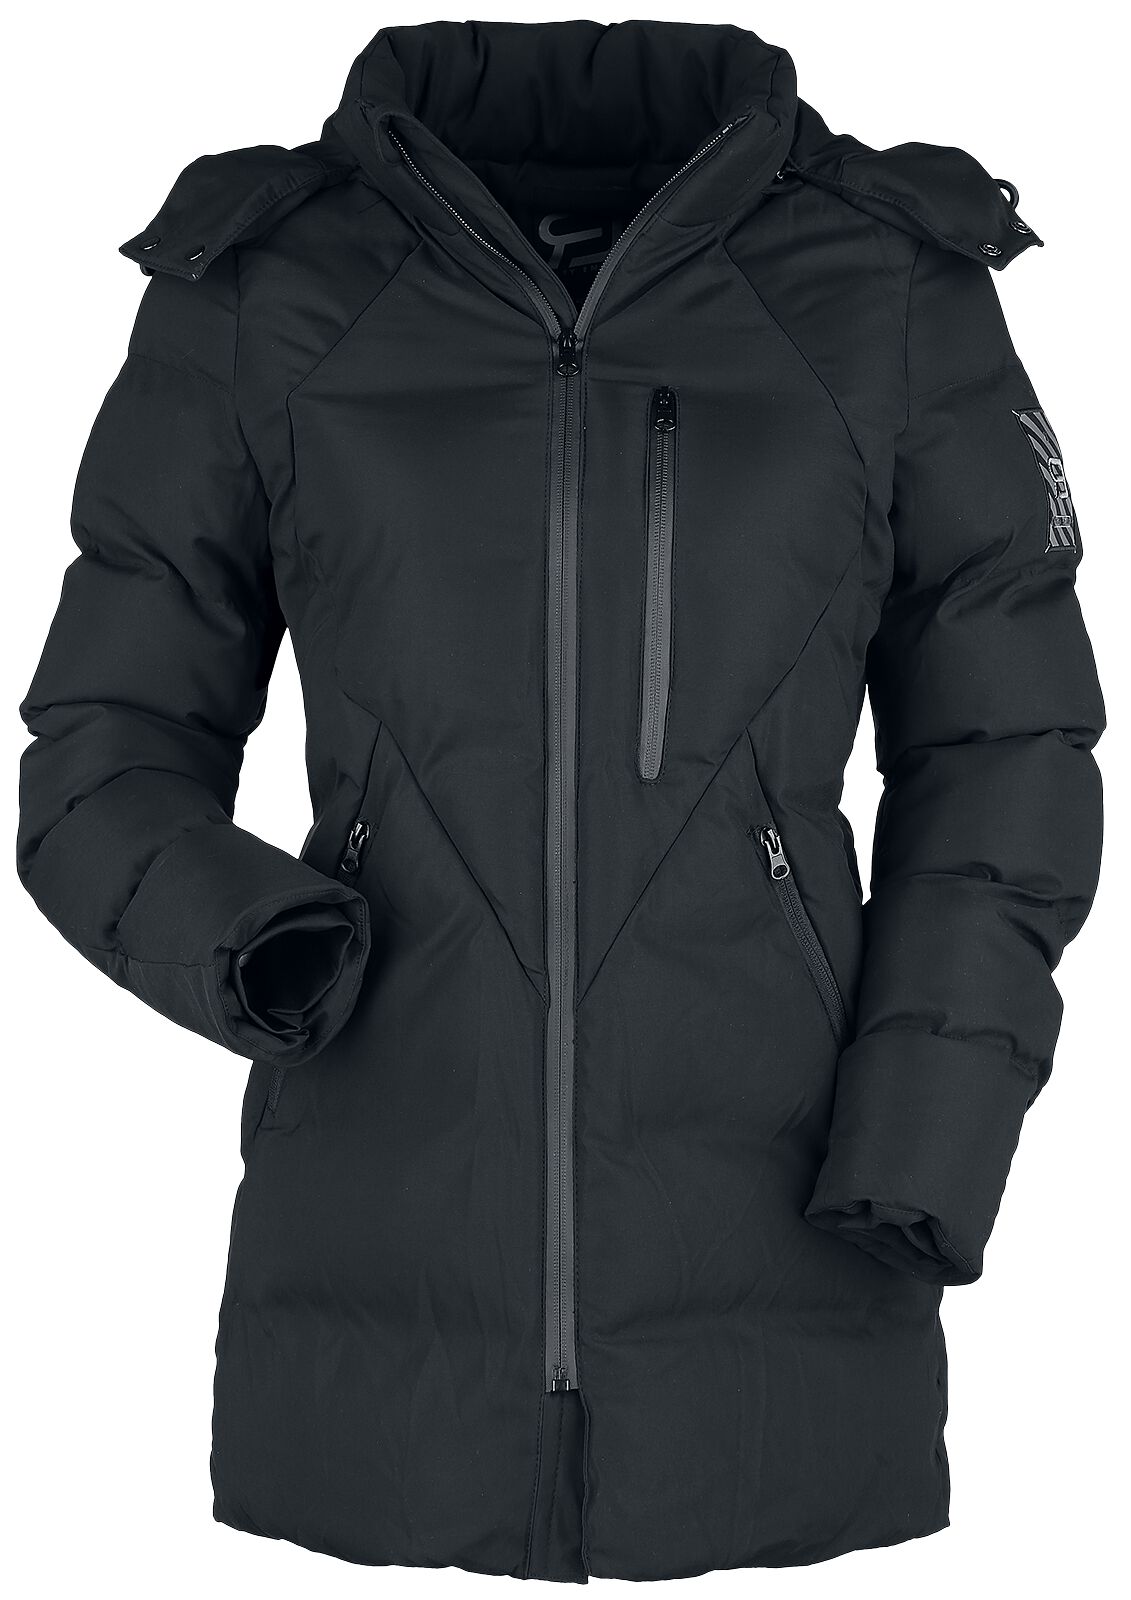 Image of Giacca invernale di RED by EMP - Black Winter Jacket with Quilting and Hood - S a XXL - Donna - nero